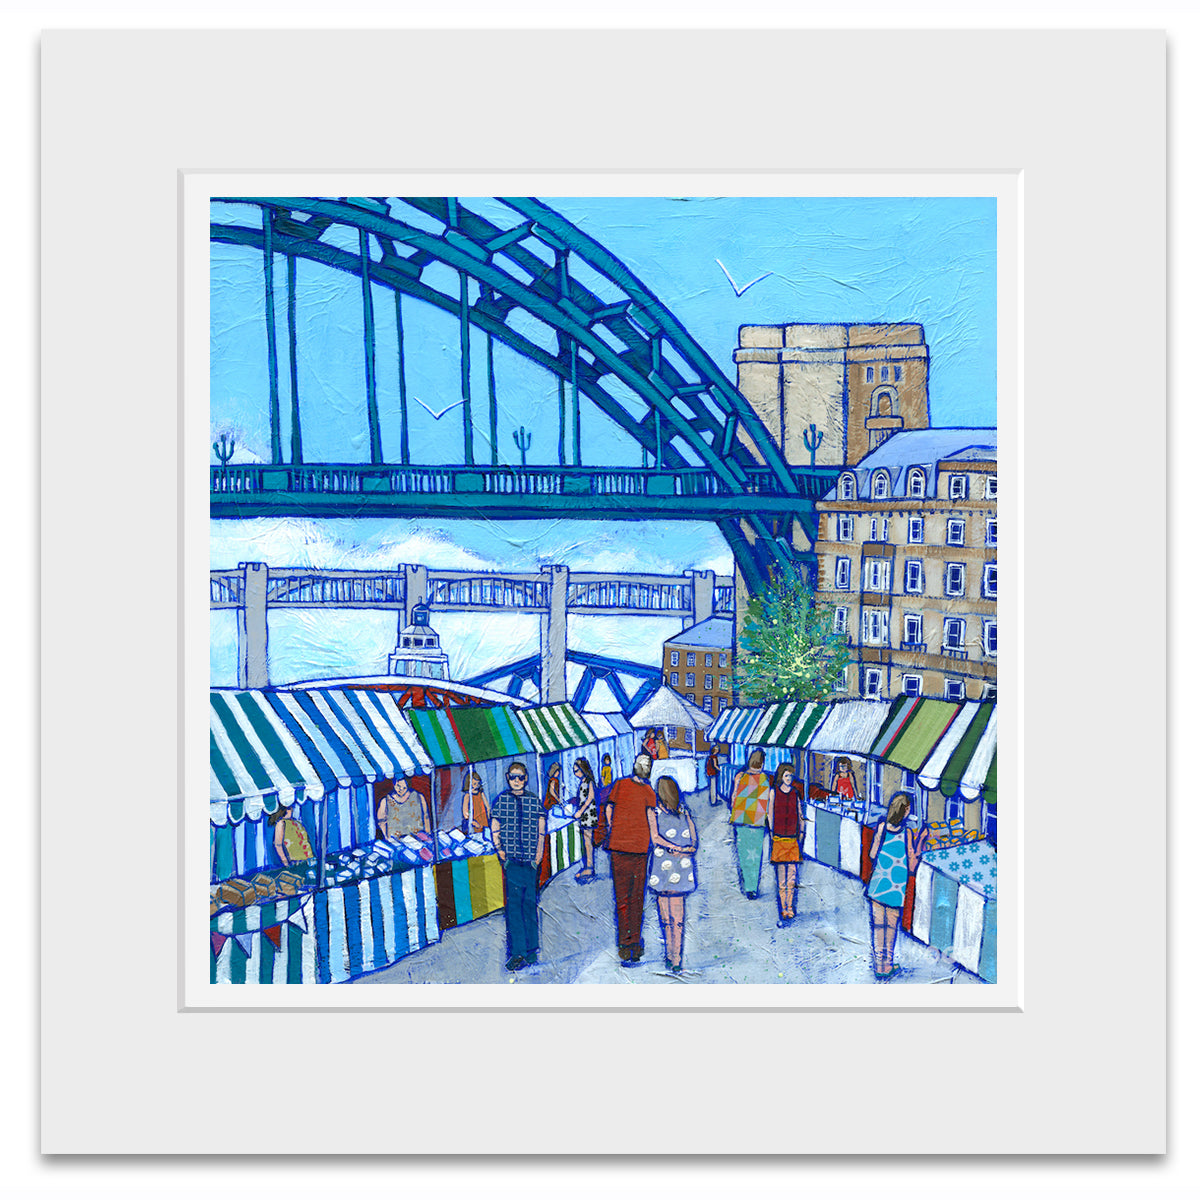 A mounted print of Newcastles Tyne bridge with the quayside market colourfully  captured underneath.